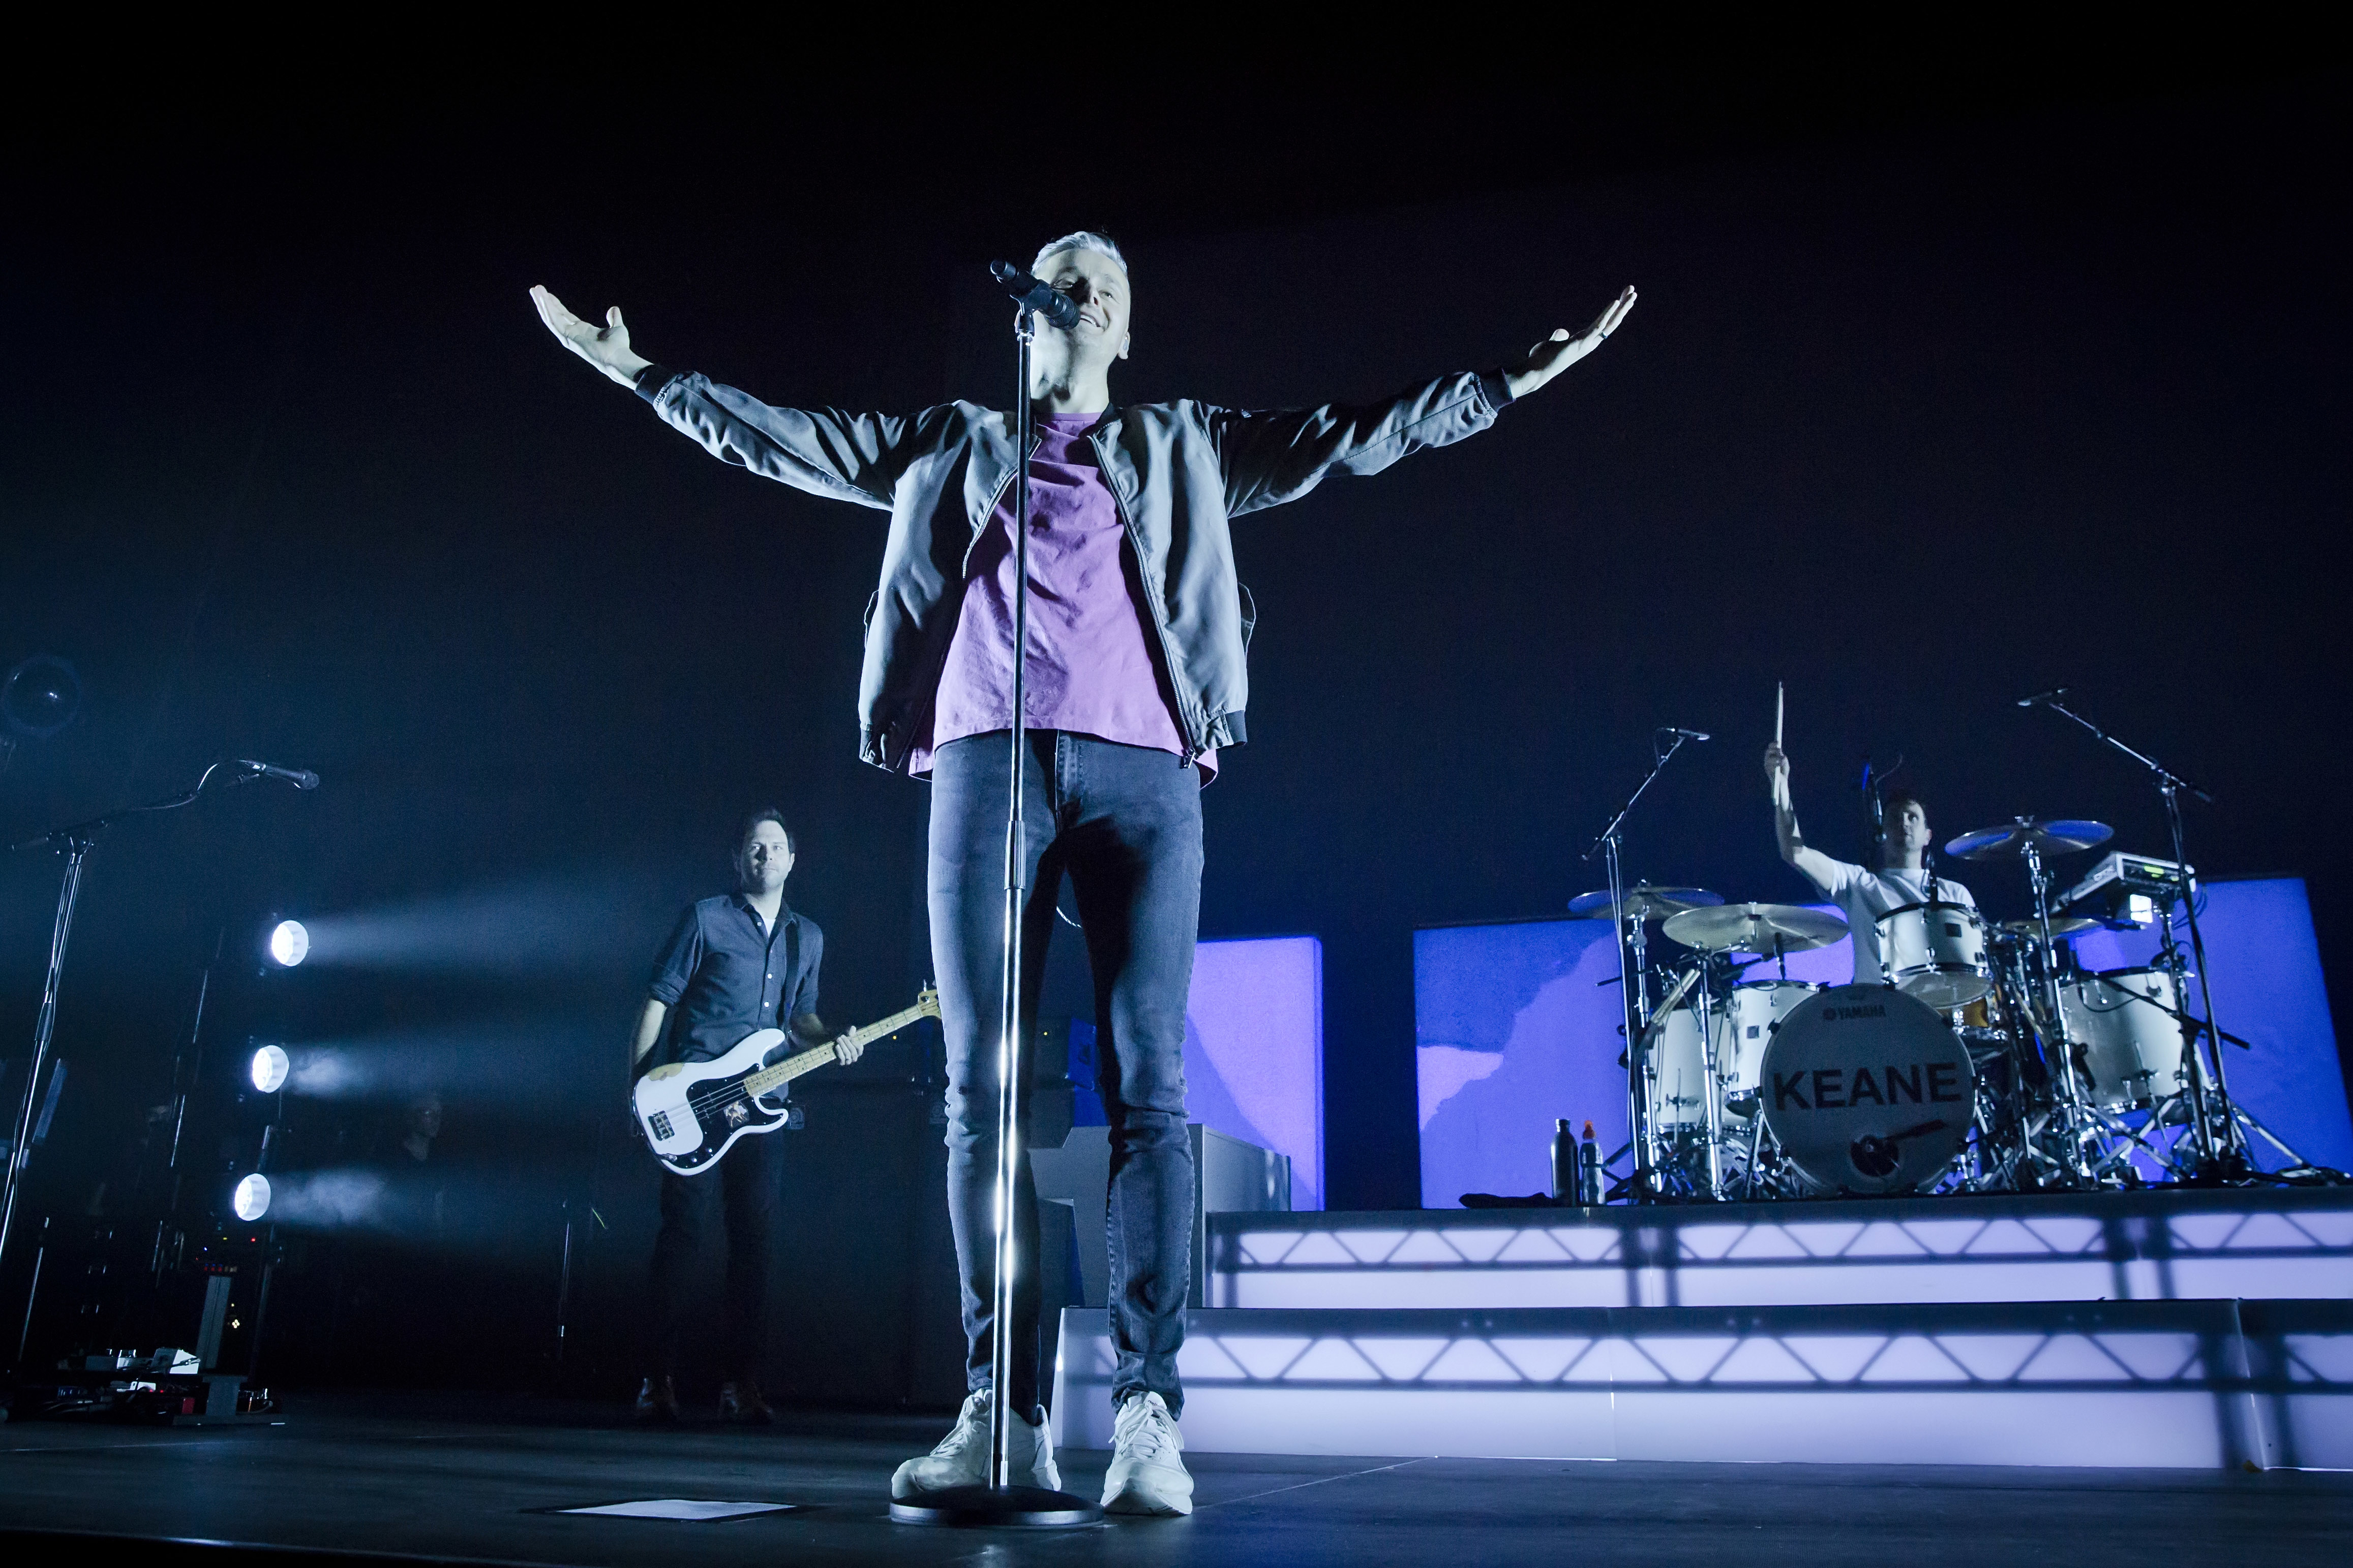 Keane performing on stage. The vocalist stands with arms outstretched while a guitarist and drummer play in the background